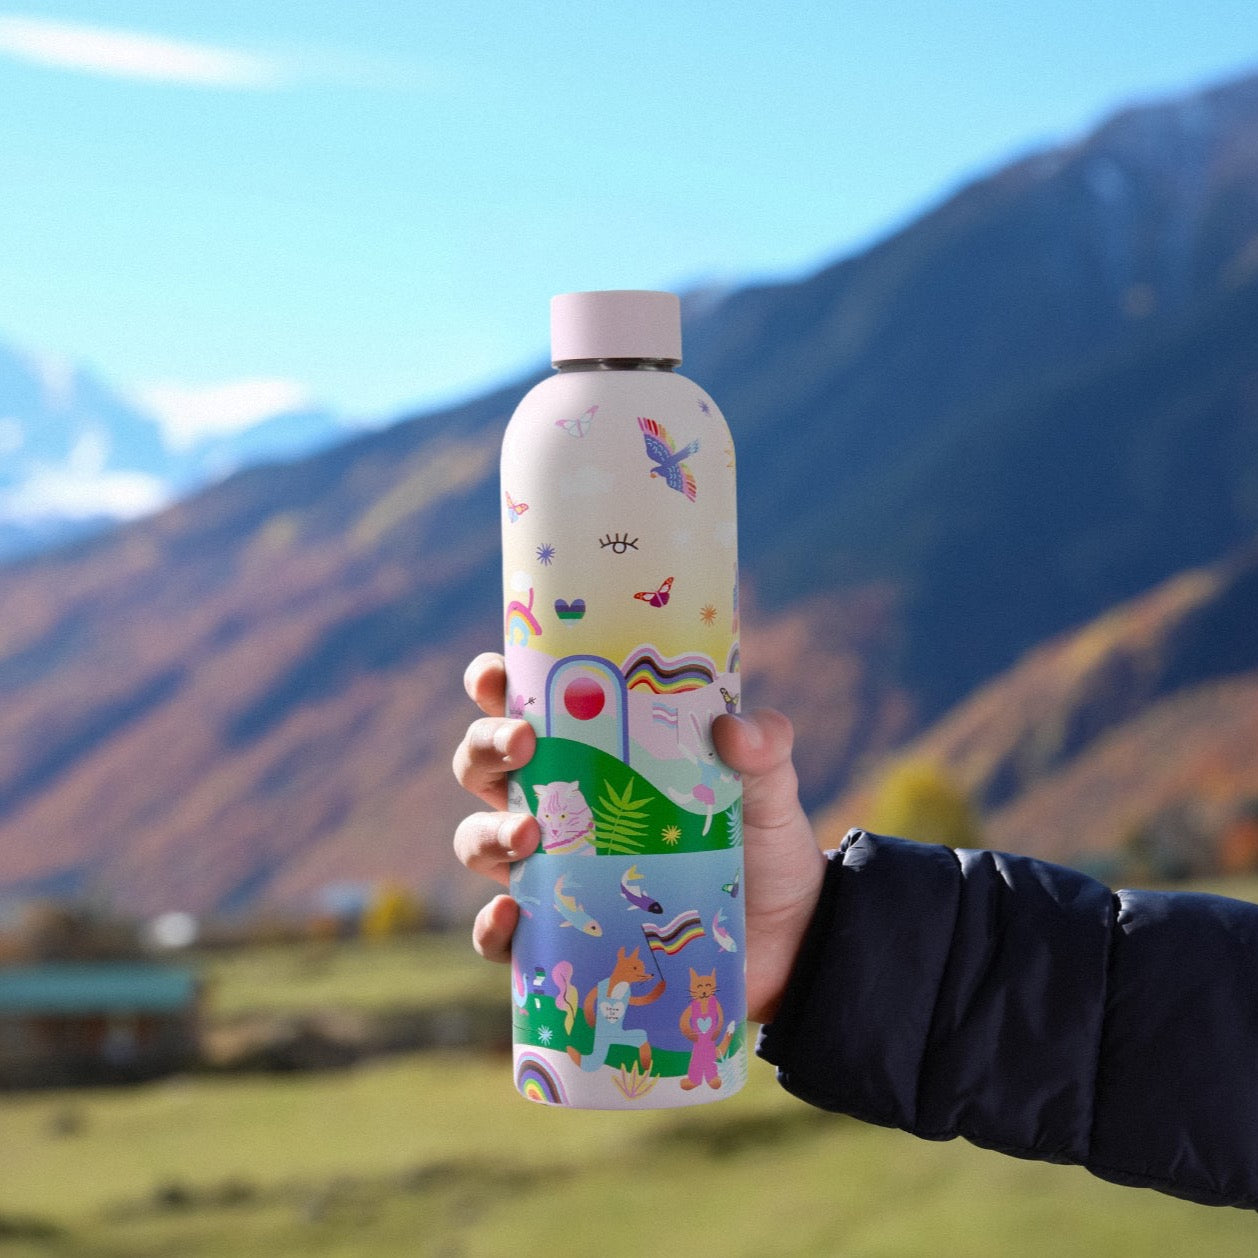 Badgie Be Yourself Steel Water Bottle BPAFree. Product image of a person holding the steel bottle brafree outdoors, on an adventure, hiking and fitness.